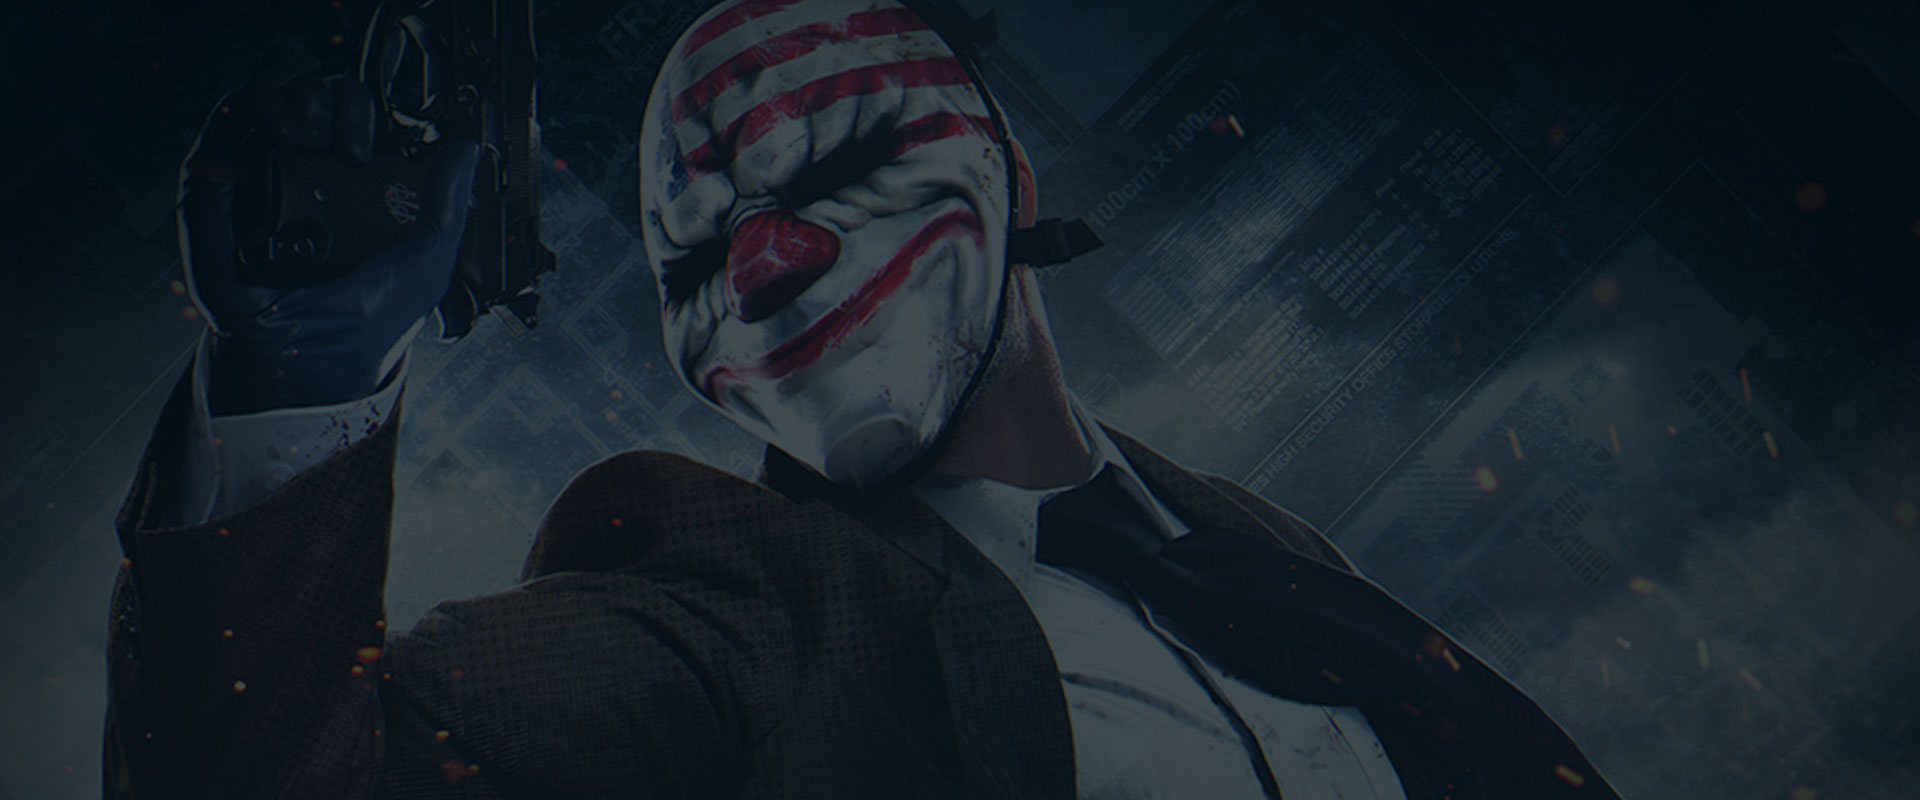 Payday 3 Early Access Crashes Servers